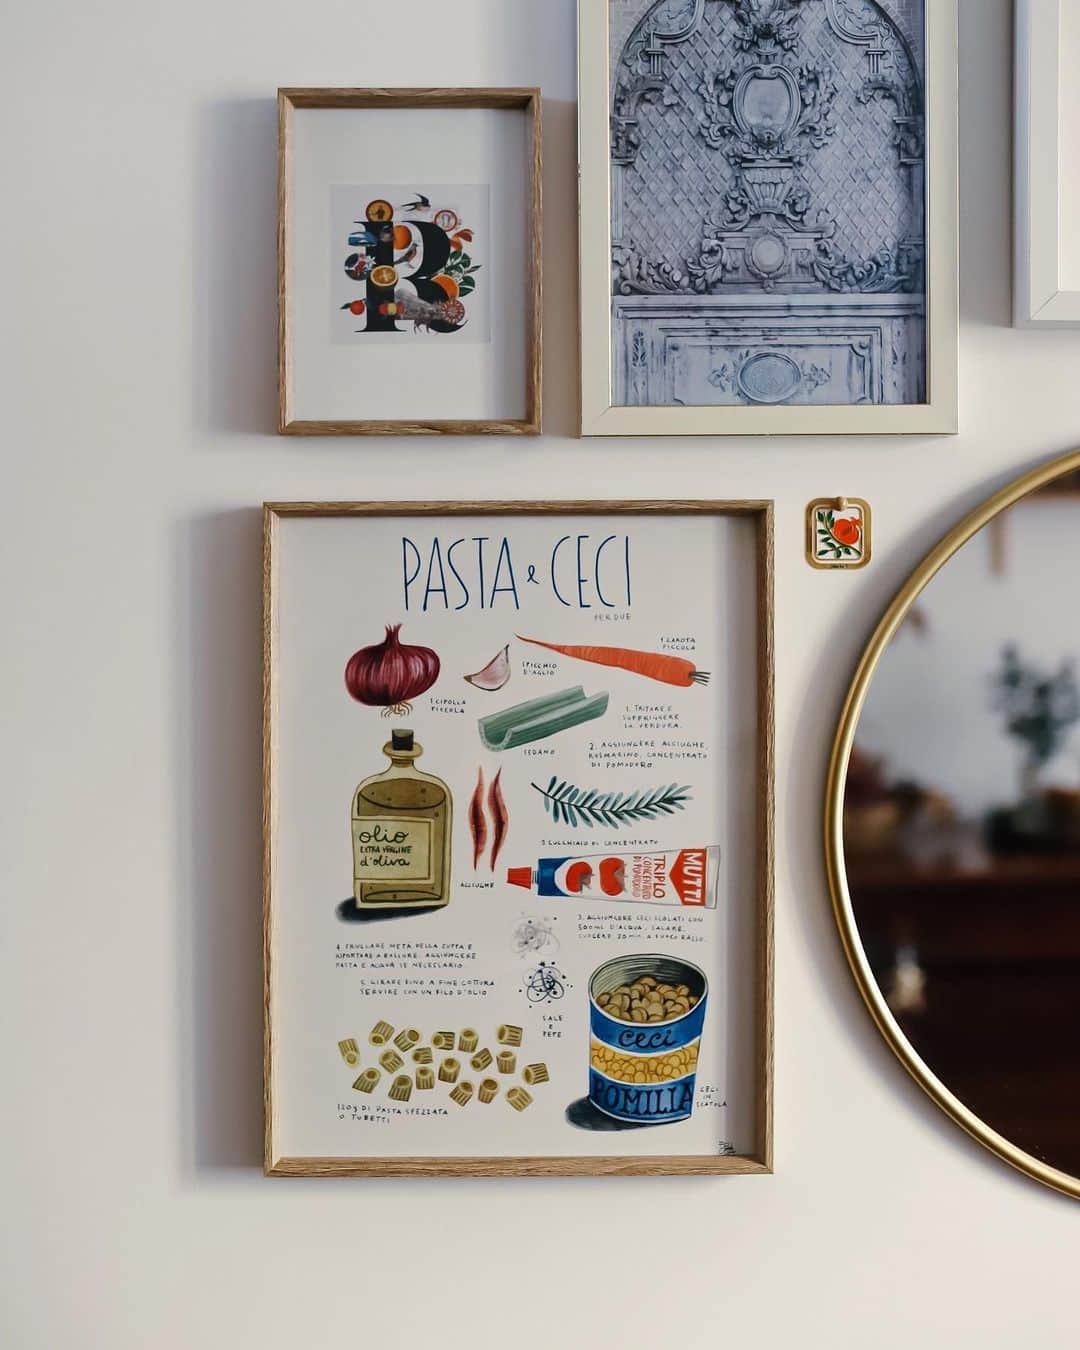 Saghar Setarehのインスタグラム：「In love with my new framed artwork, a pasta and chickpea recipe illustration by @felicita.sala. A little Christmas present for "the wall", where I like to change stuff sometimes. ⠀⠀⠀⠀⠀⠀⠀⠀⠀ #LabNoonHome #StayingHome」